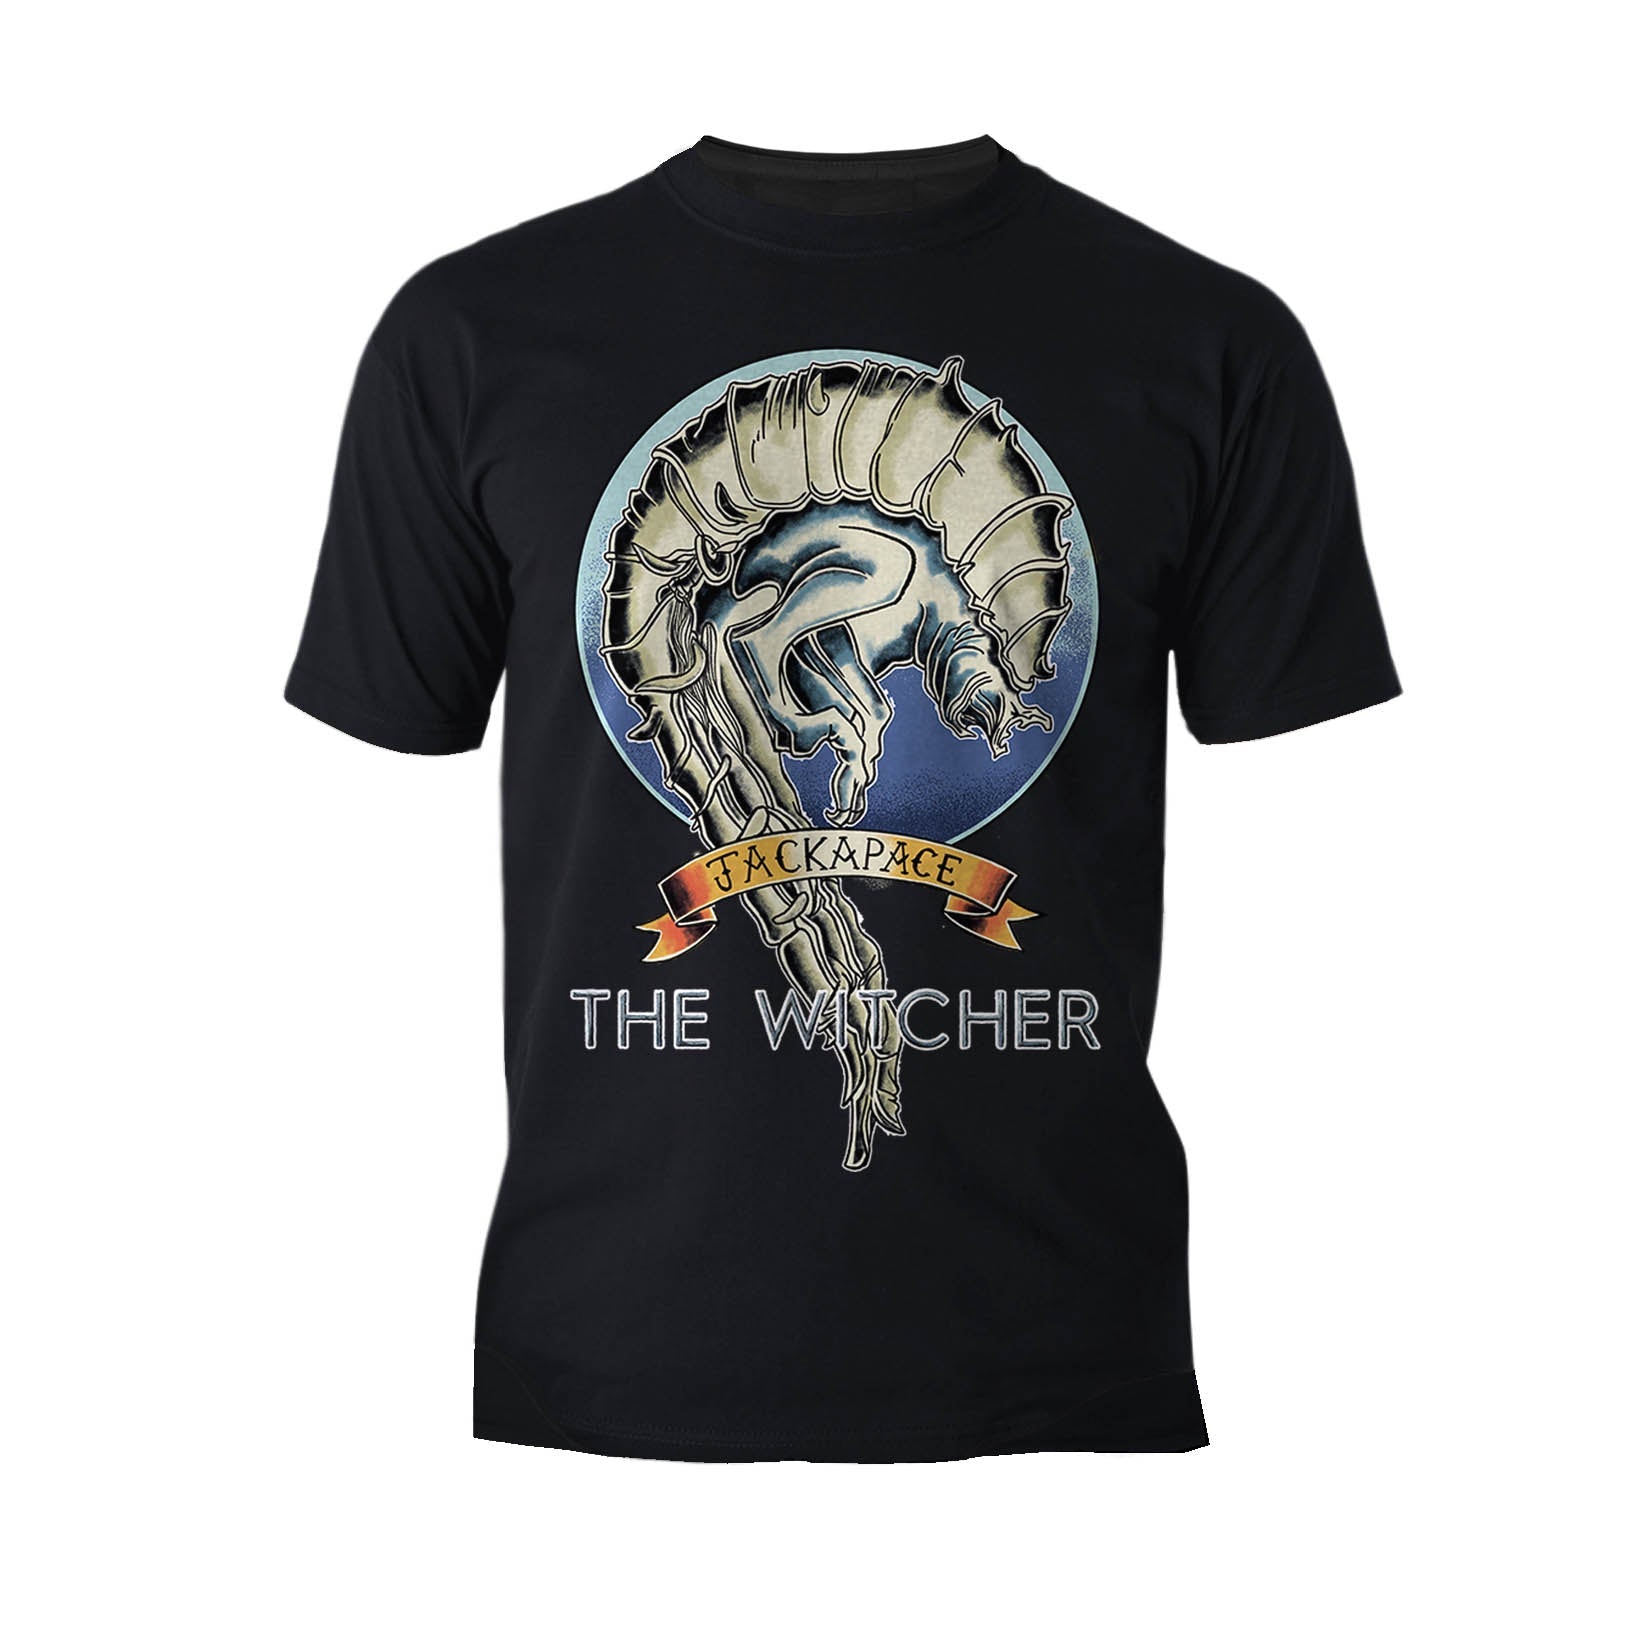 The Witcher Book of Beasts Jackapace Official Men's T-Shirt